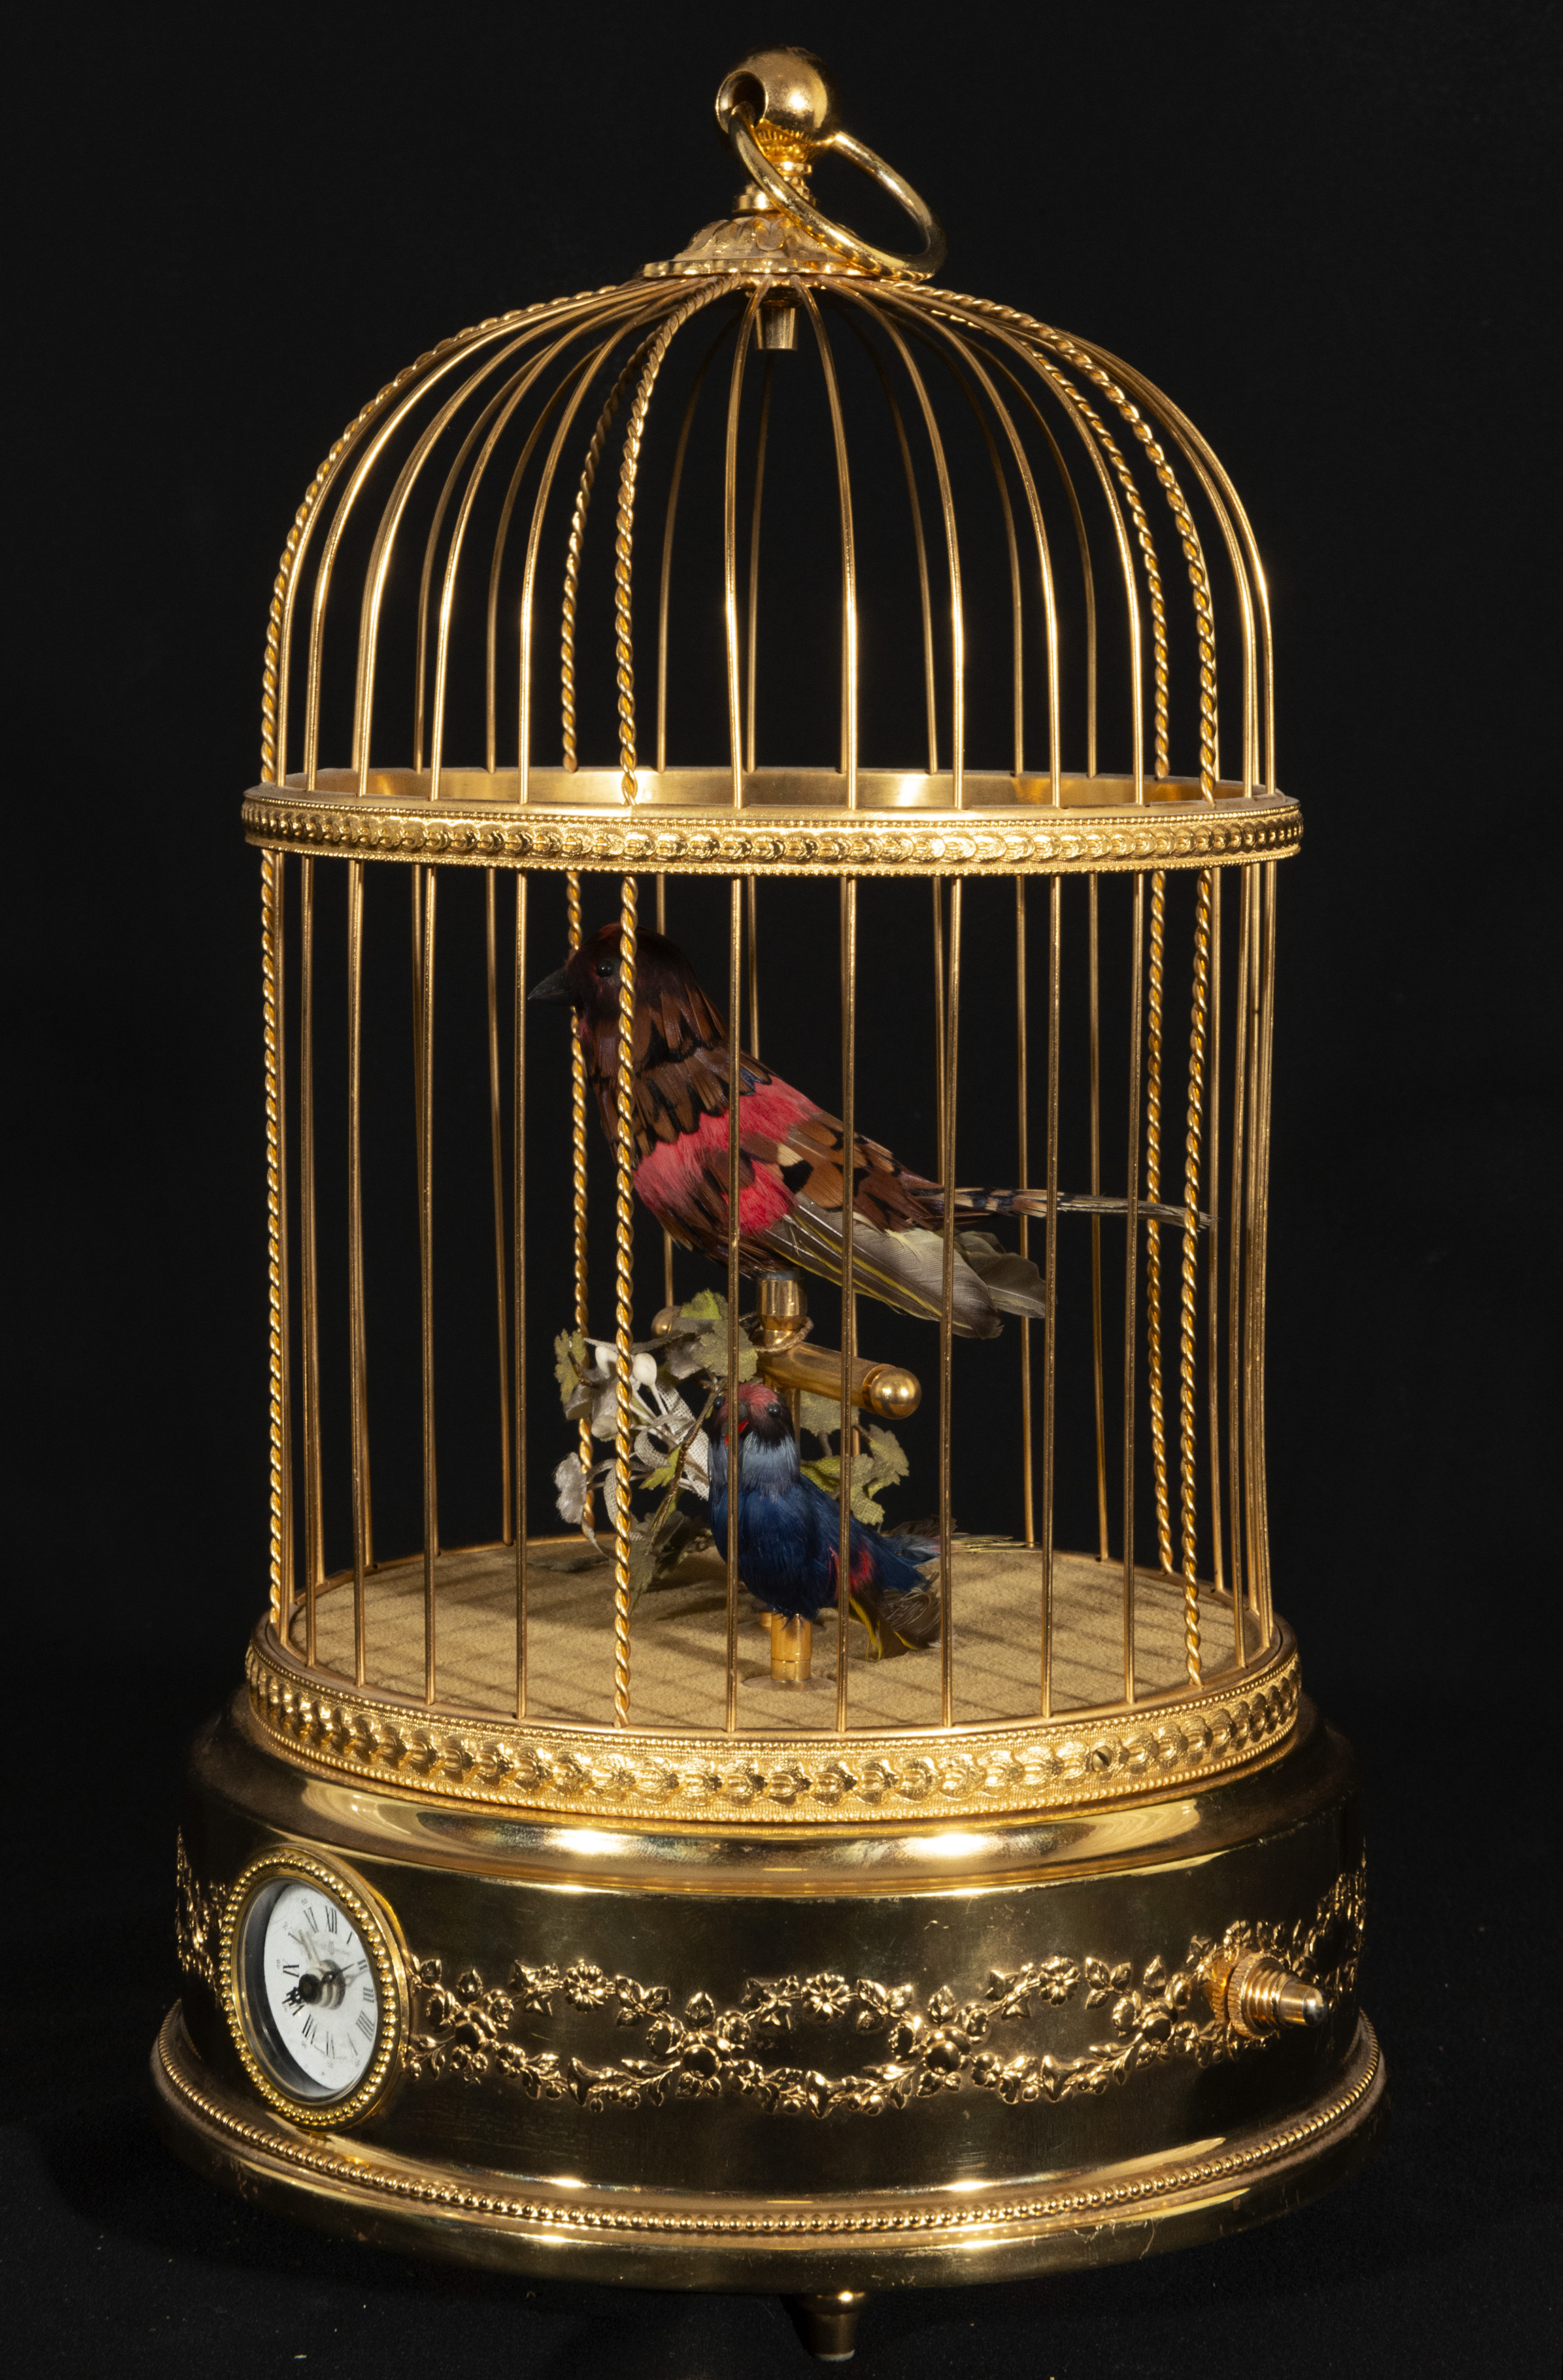 Automaton clock cage with songbird from the 20th century, Germany - Image 5 of 6